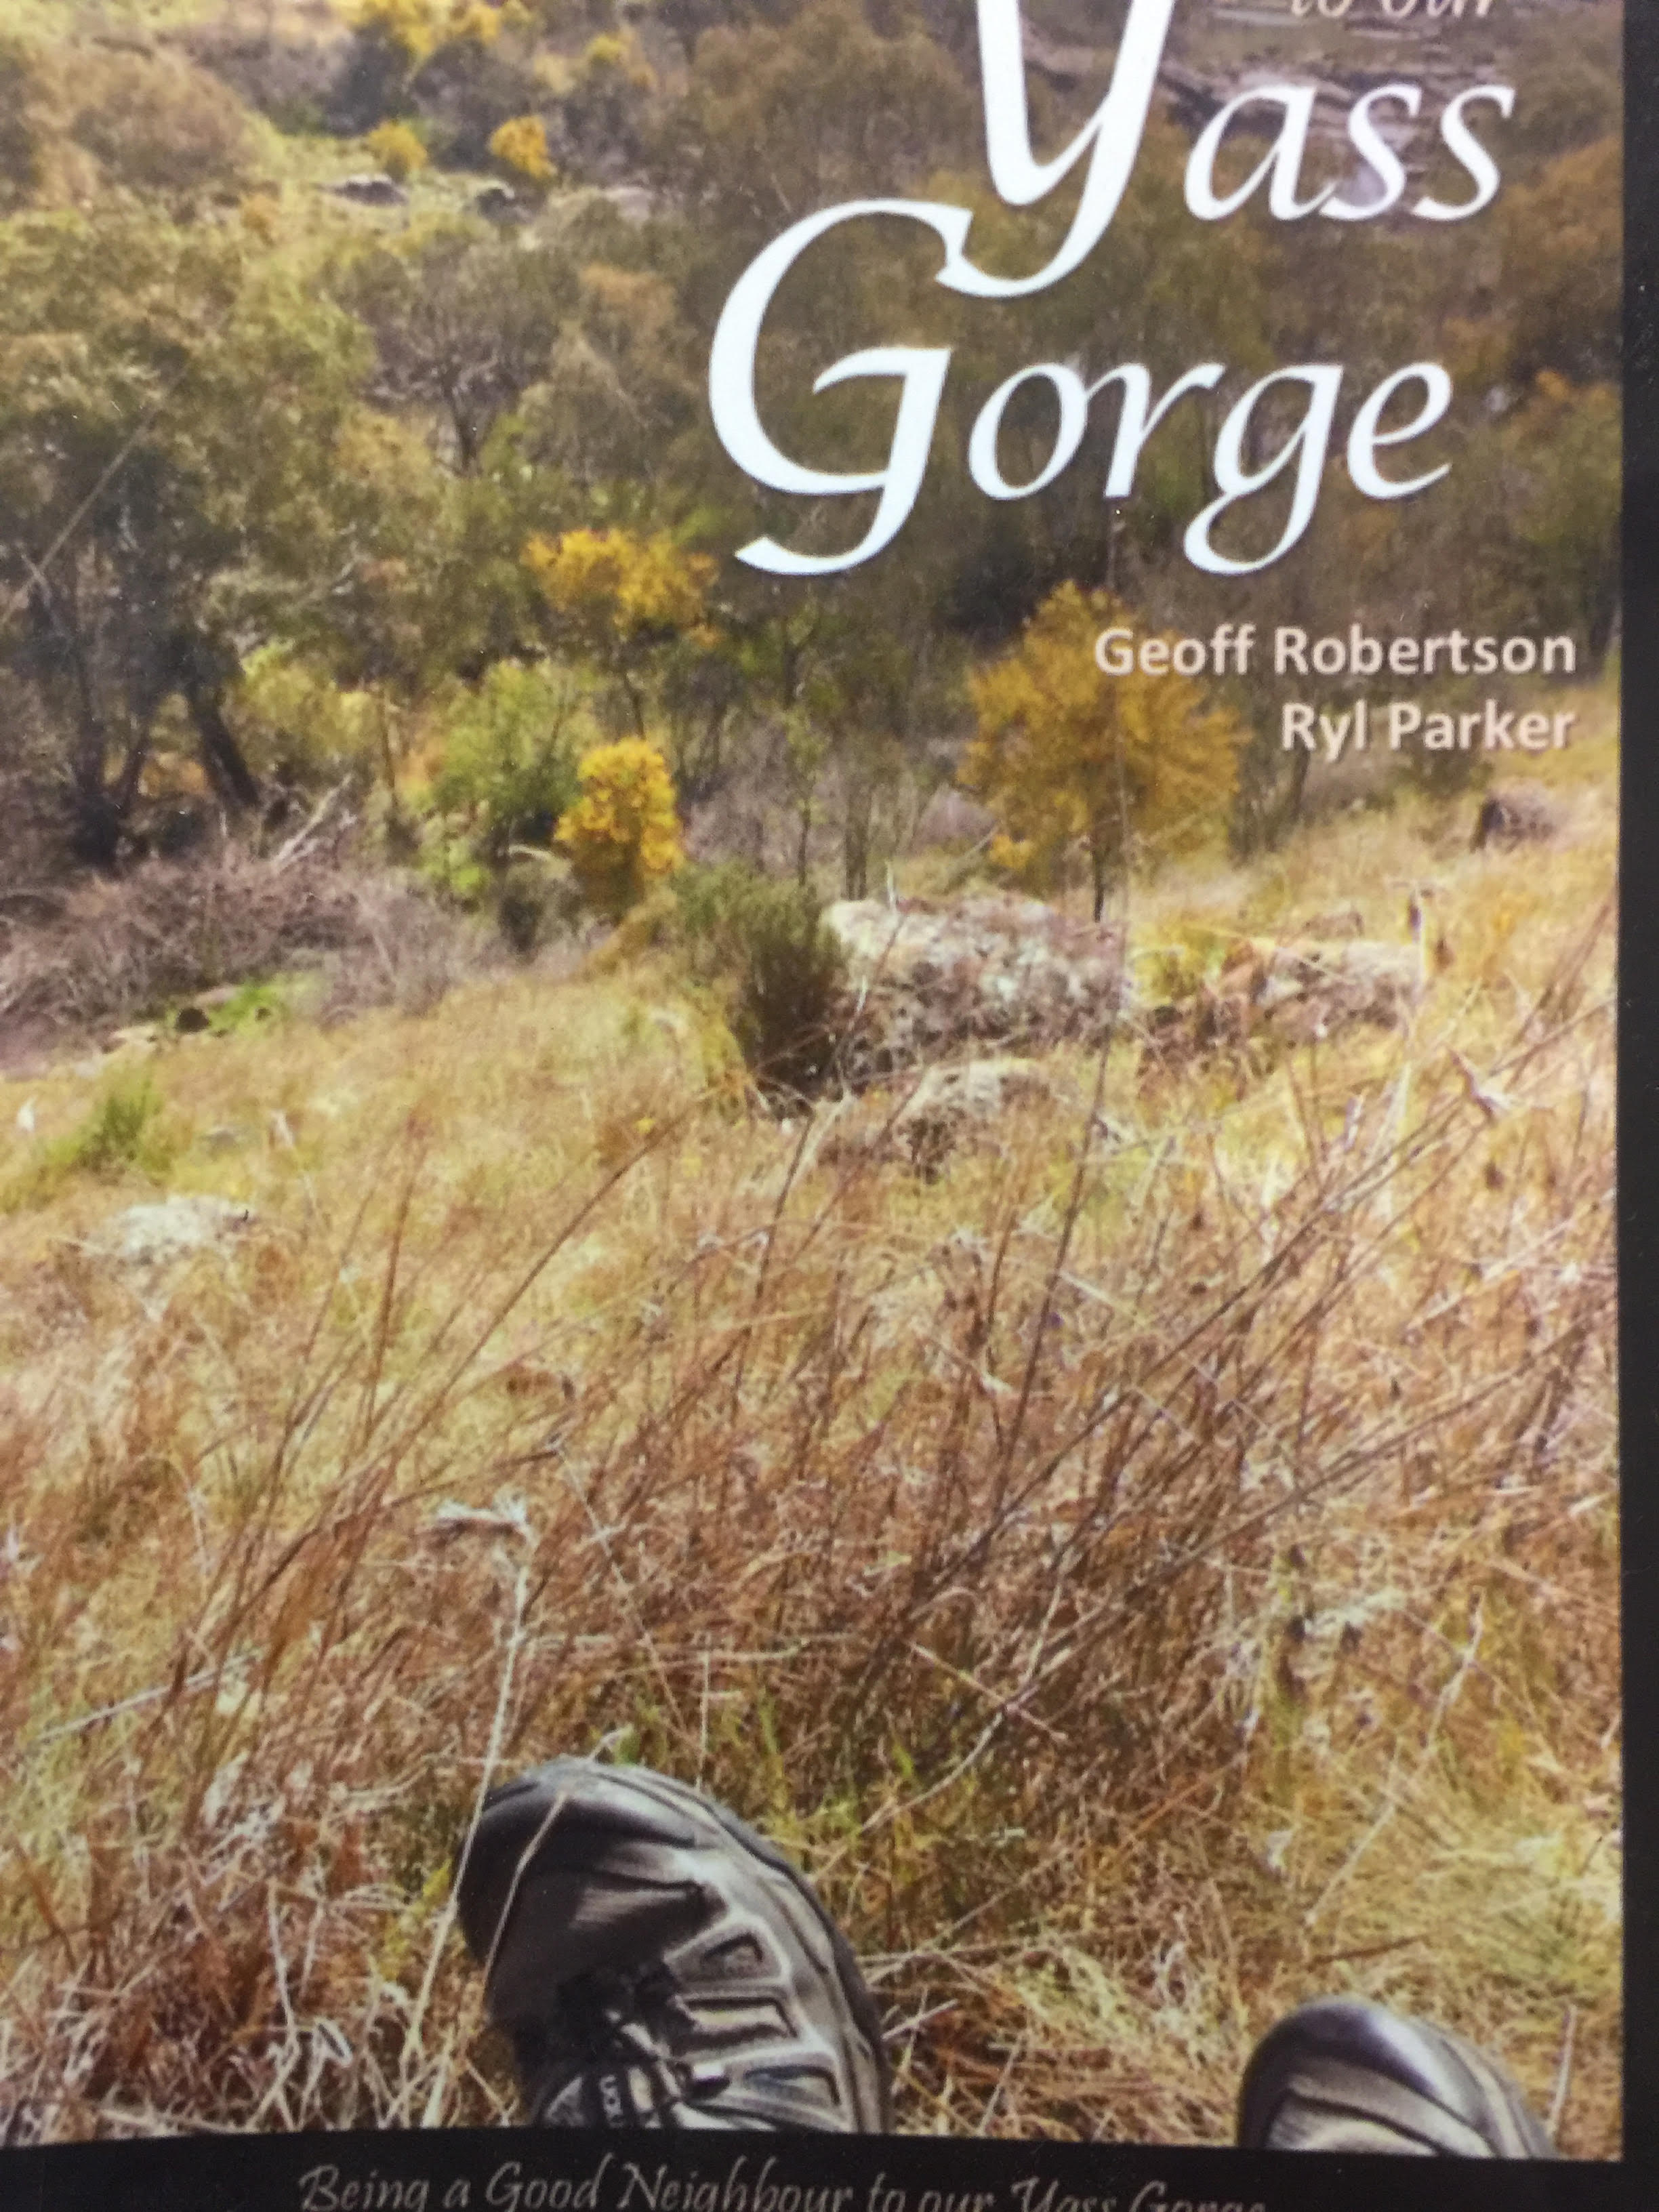 Yass Gorge information booklet